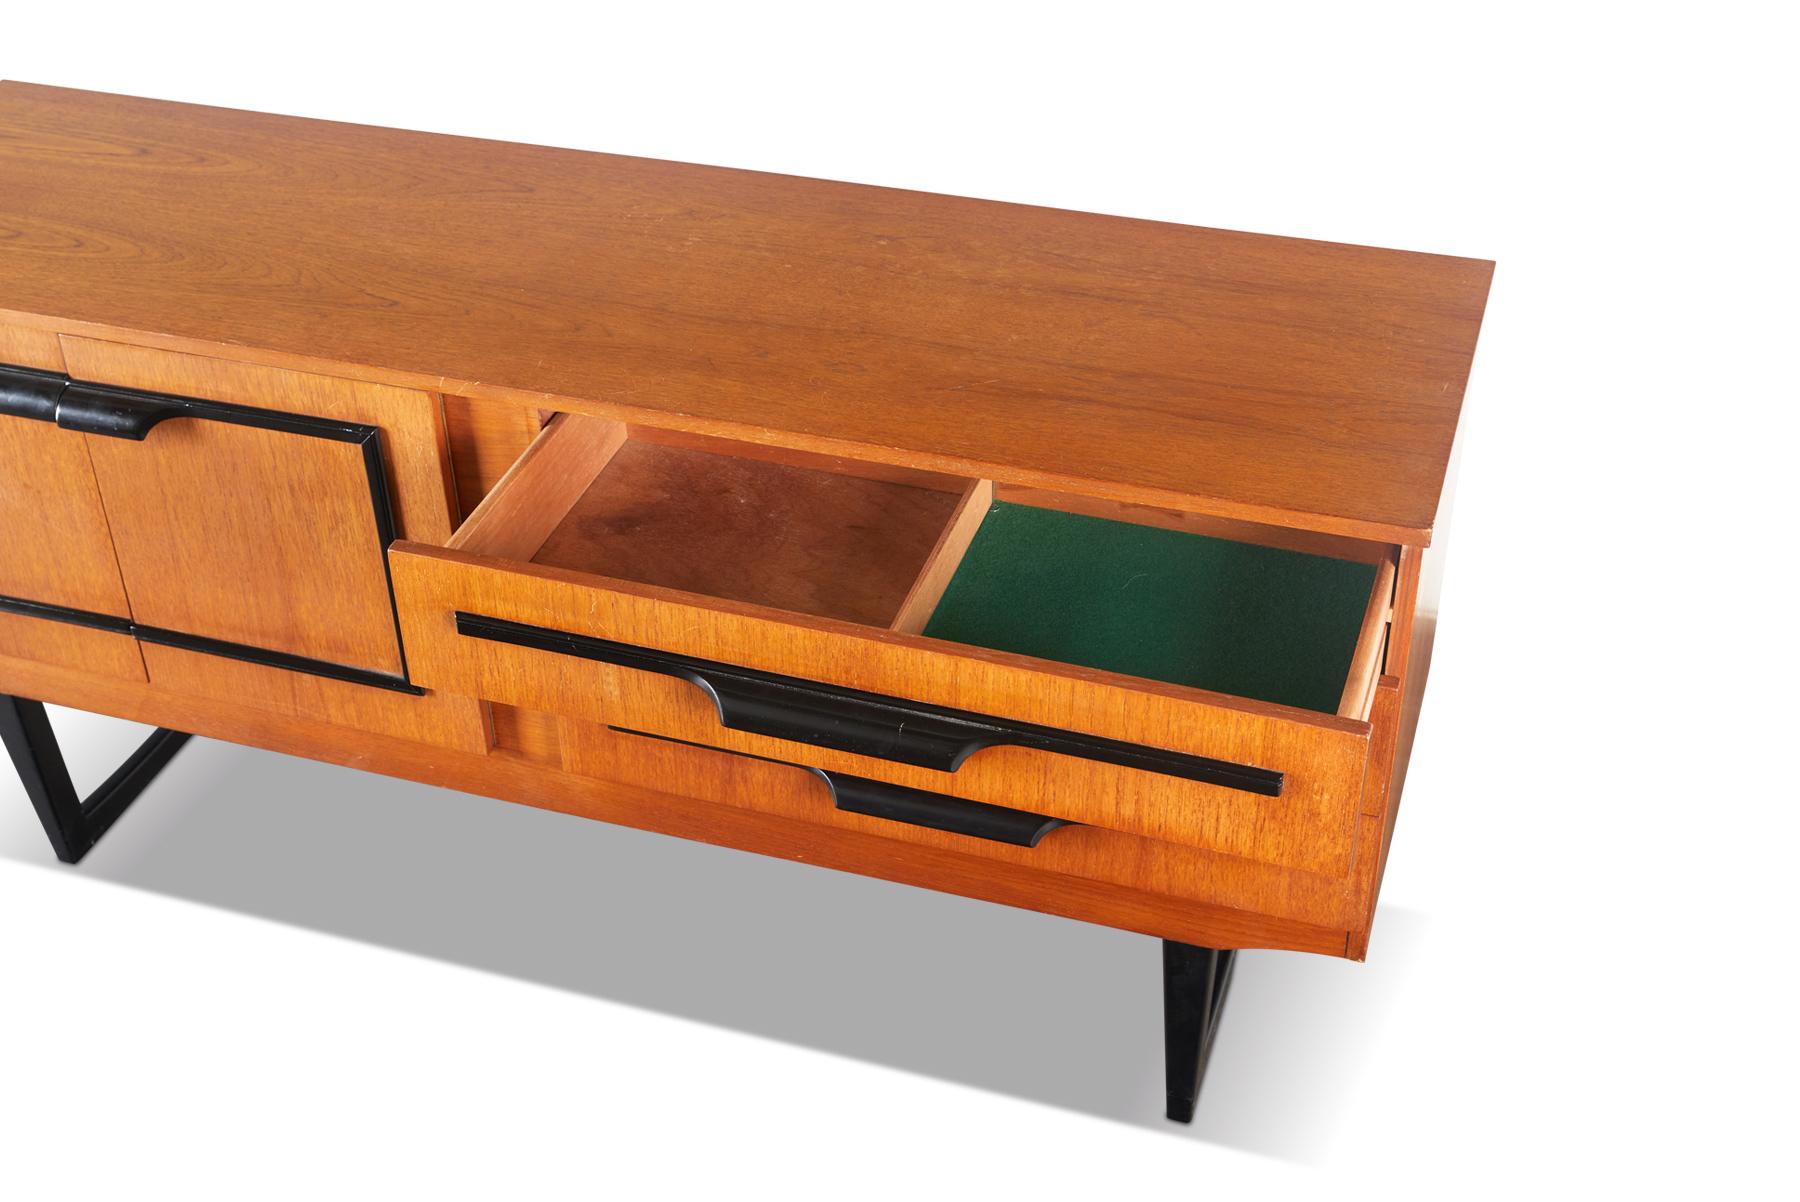 English Modern Midcentury Credenza in Teak with Black Lacquer Accents For Sale 1